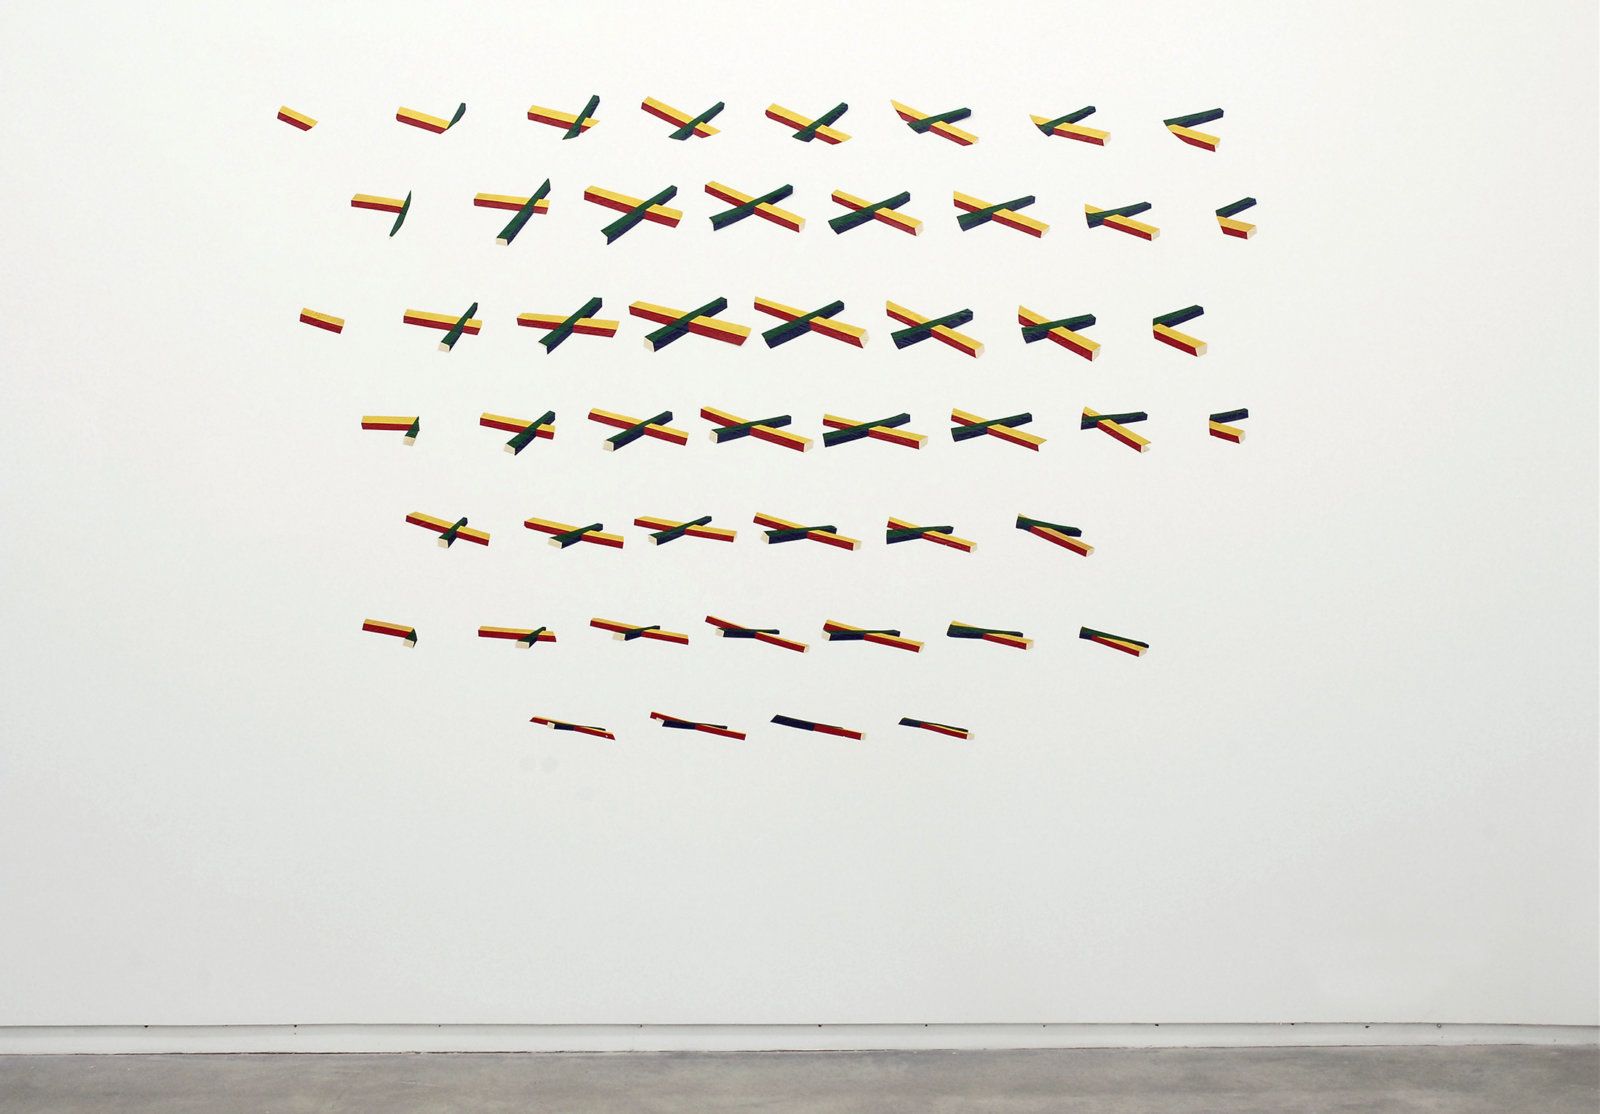 Jerry Pethick, Intersection, 1970–1972, 49 tape images, 58 x 88 in. (147 x 224 cm)